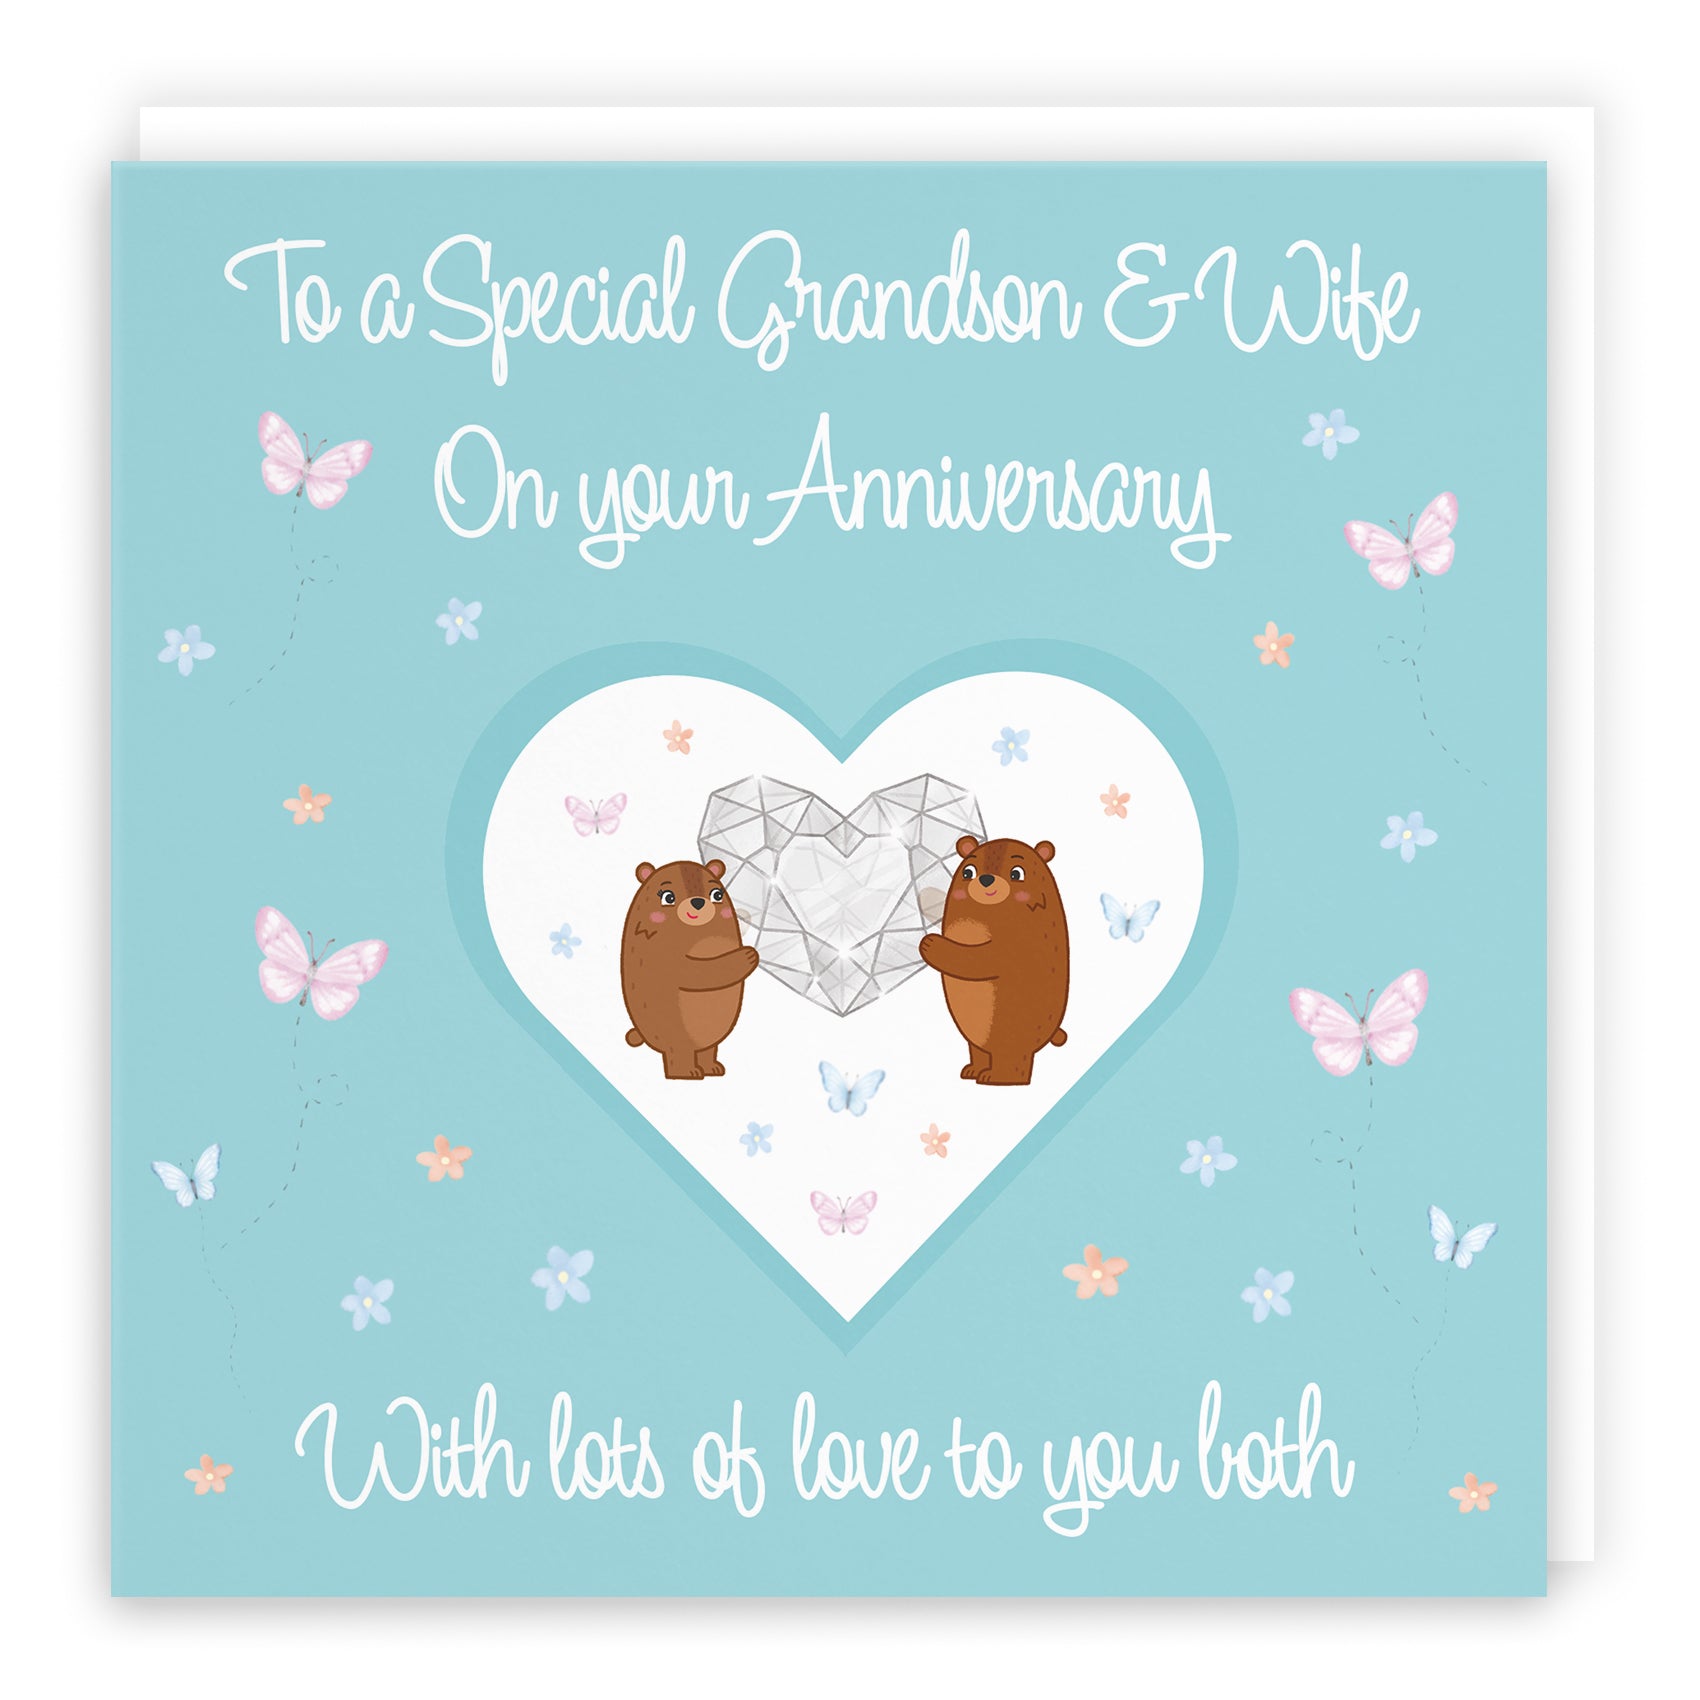 Grandson And Wife Anniversary Card Romantic Meadows